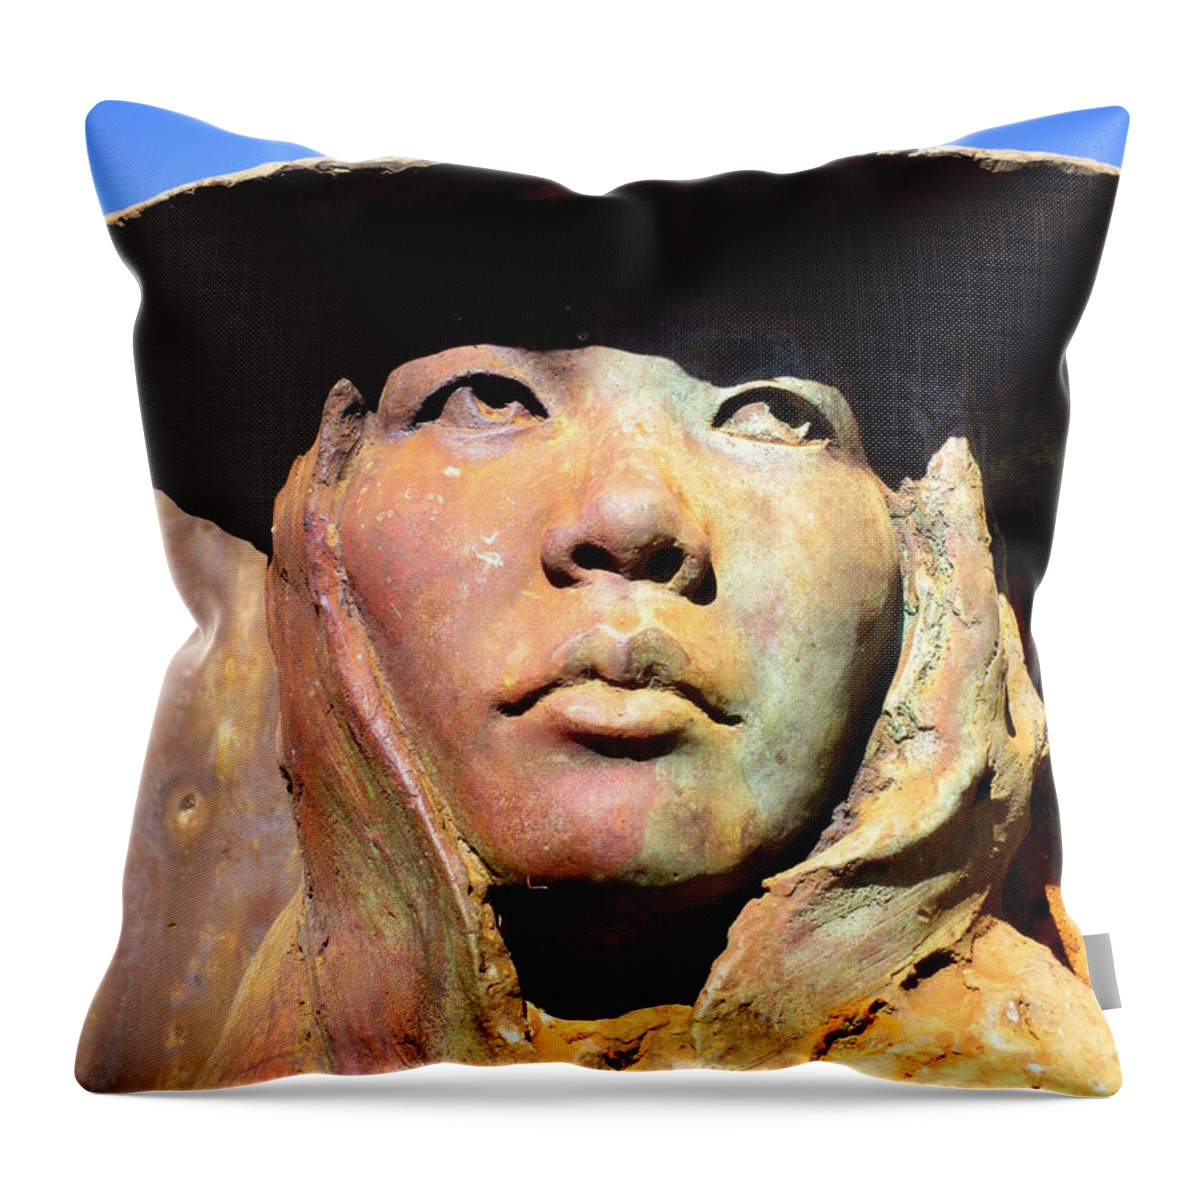 Bronze Throw Pillow featuring the photograph Koloa Sugar Industry Monument 11 by Randall Weidner